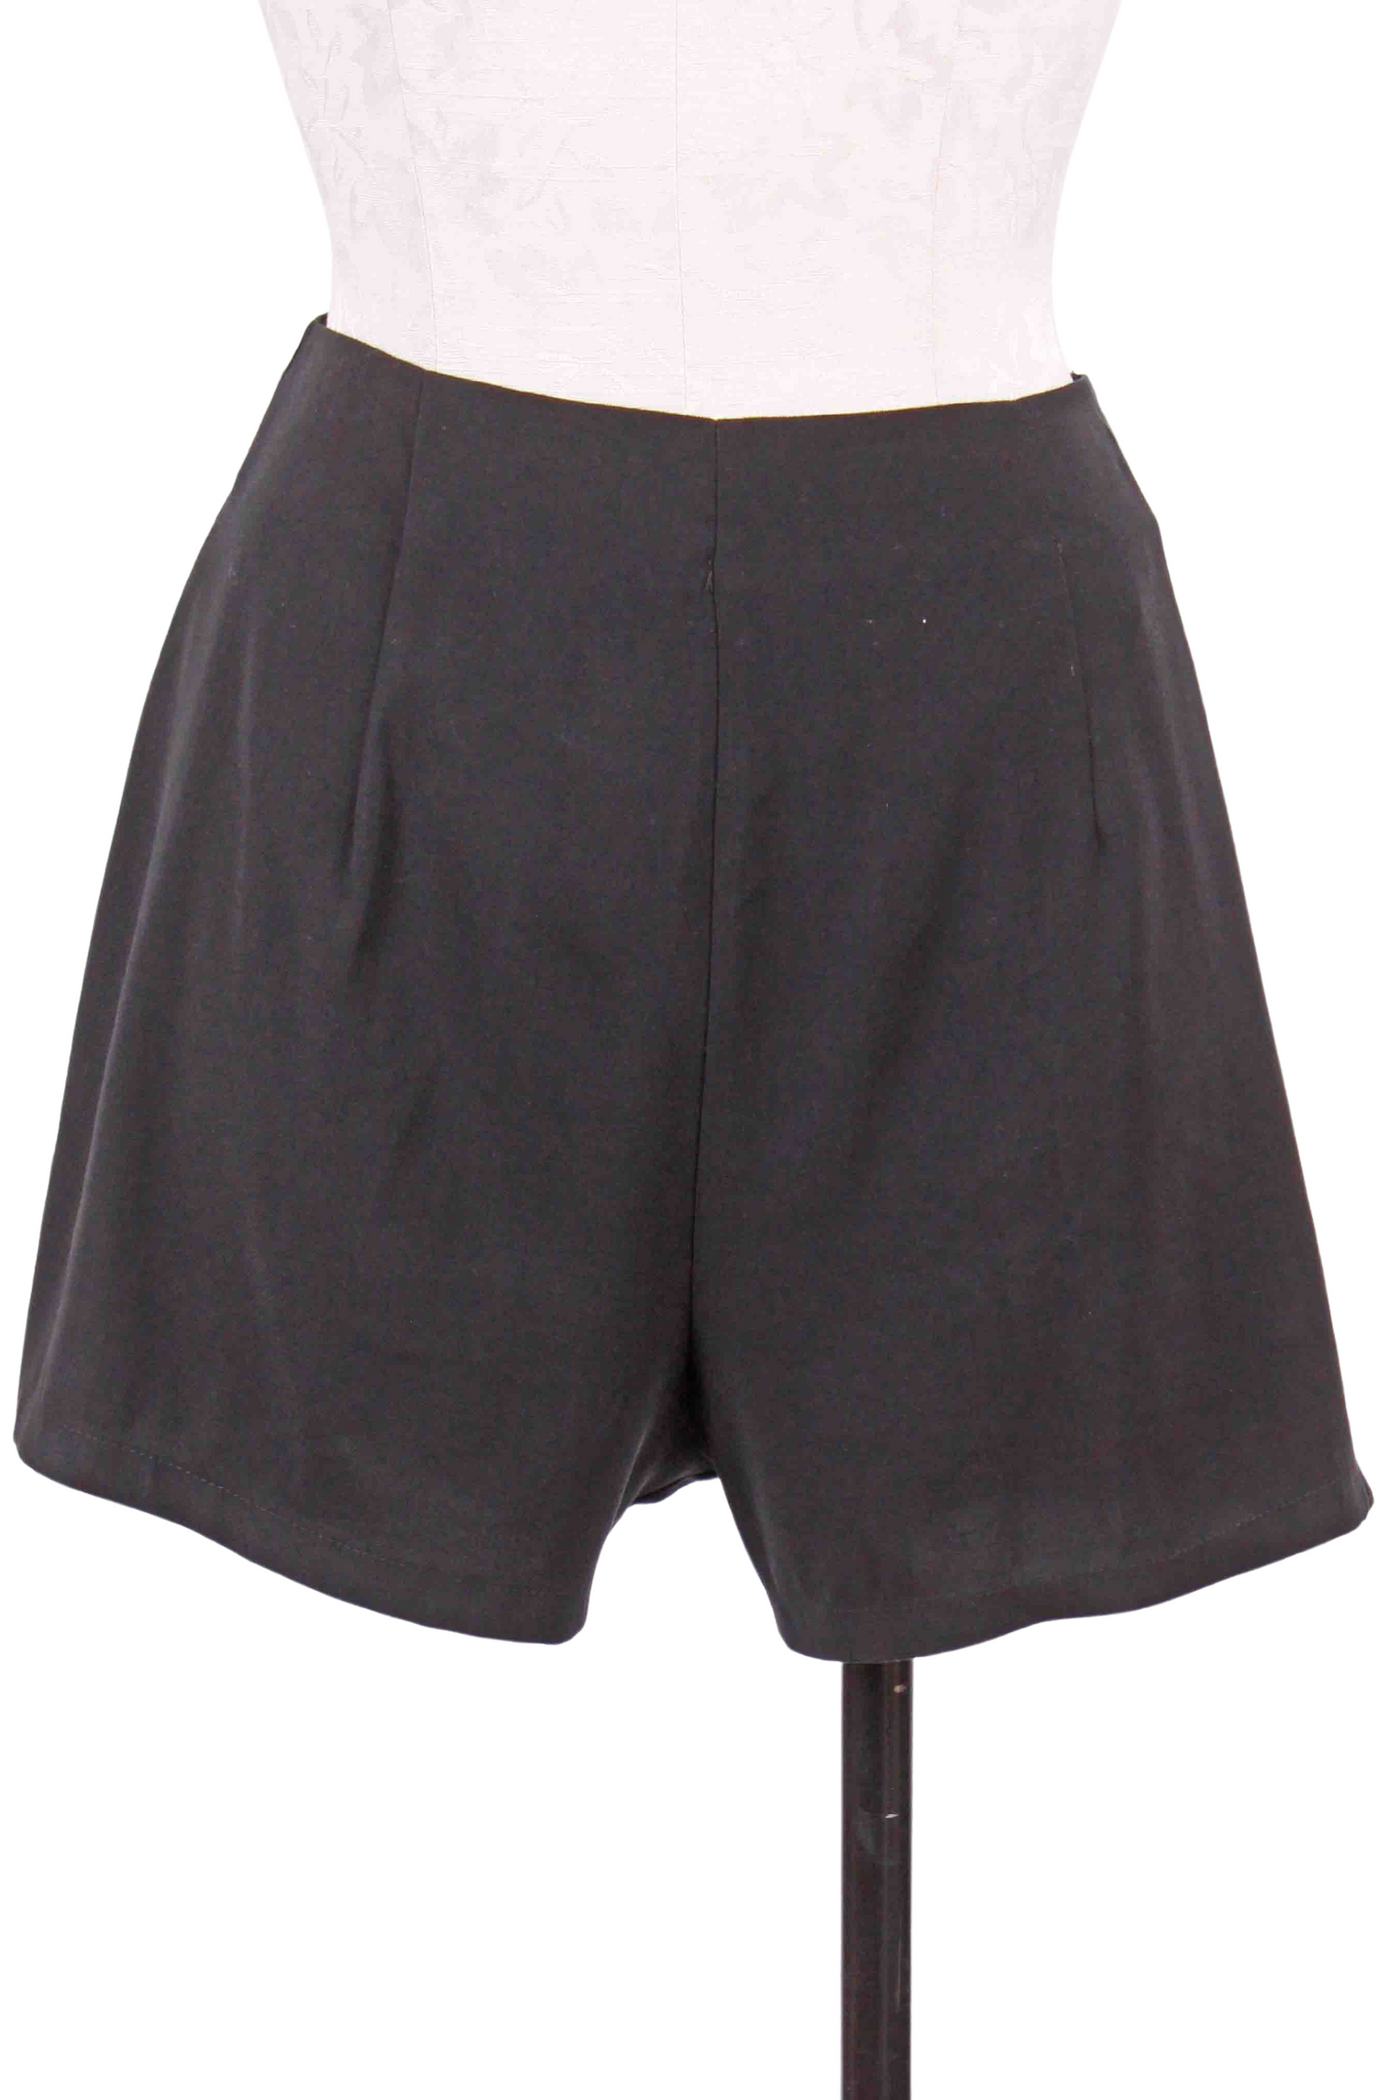 Black Twill Dress Shorts by Apricot with a back zipper